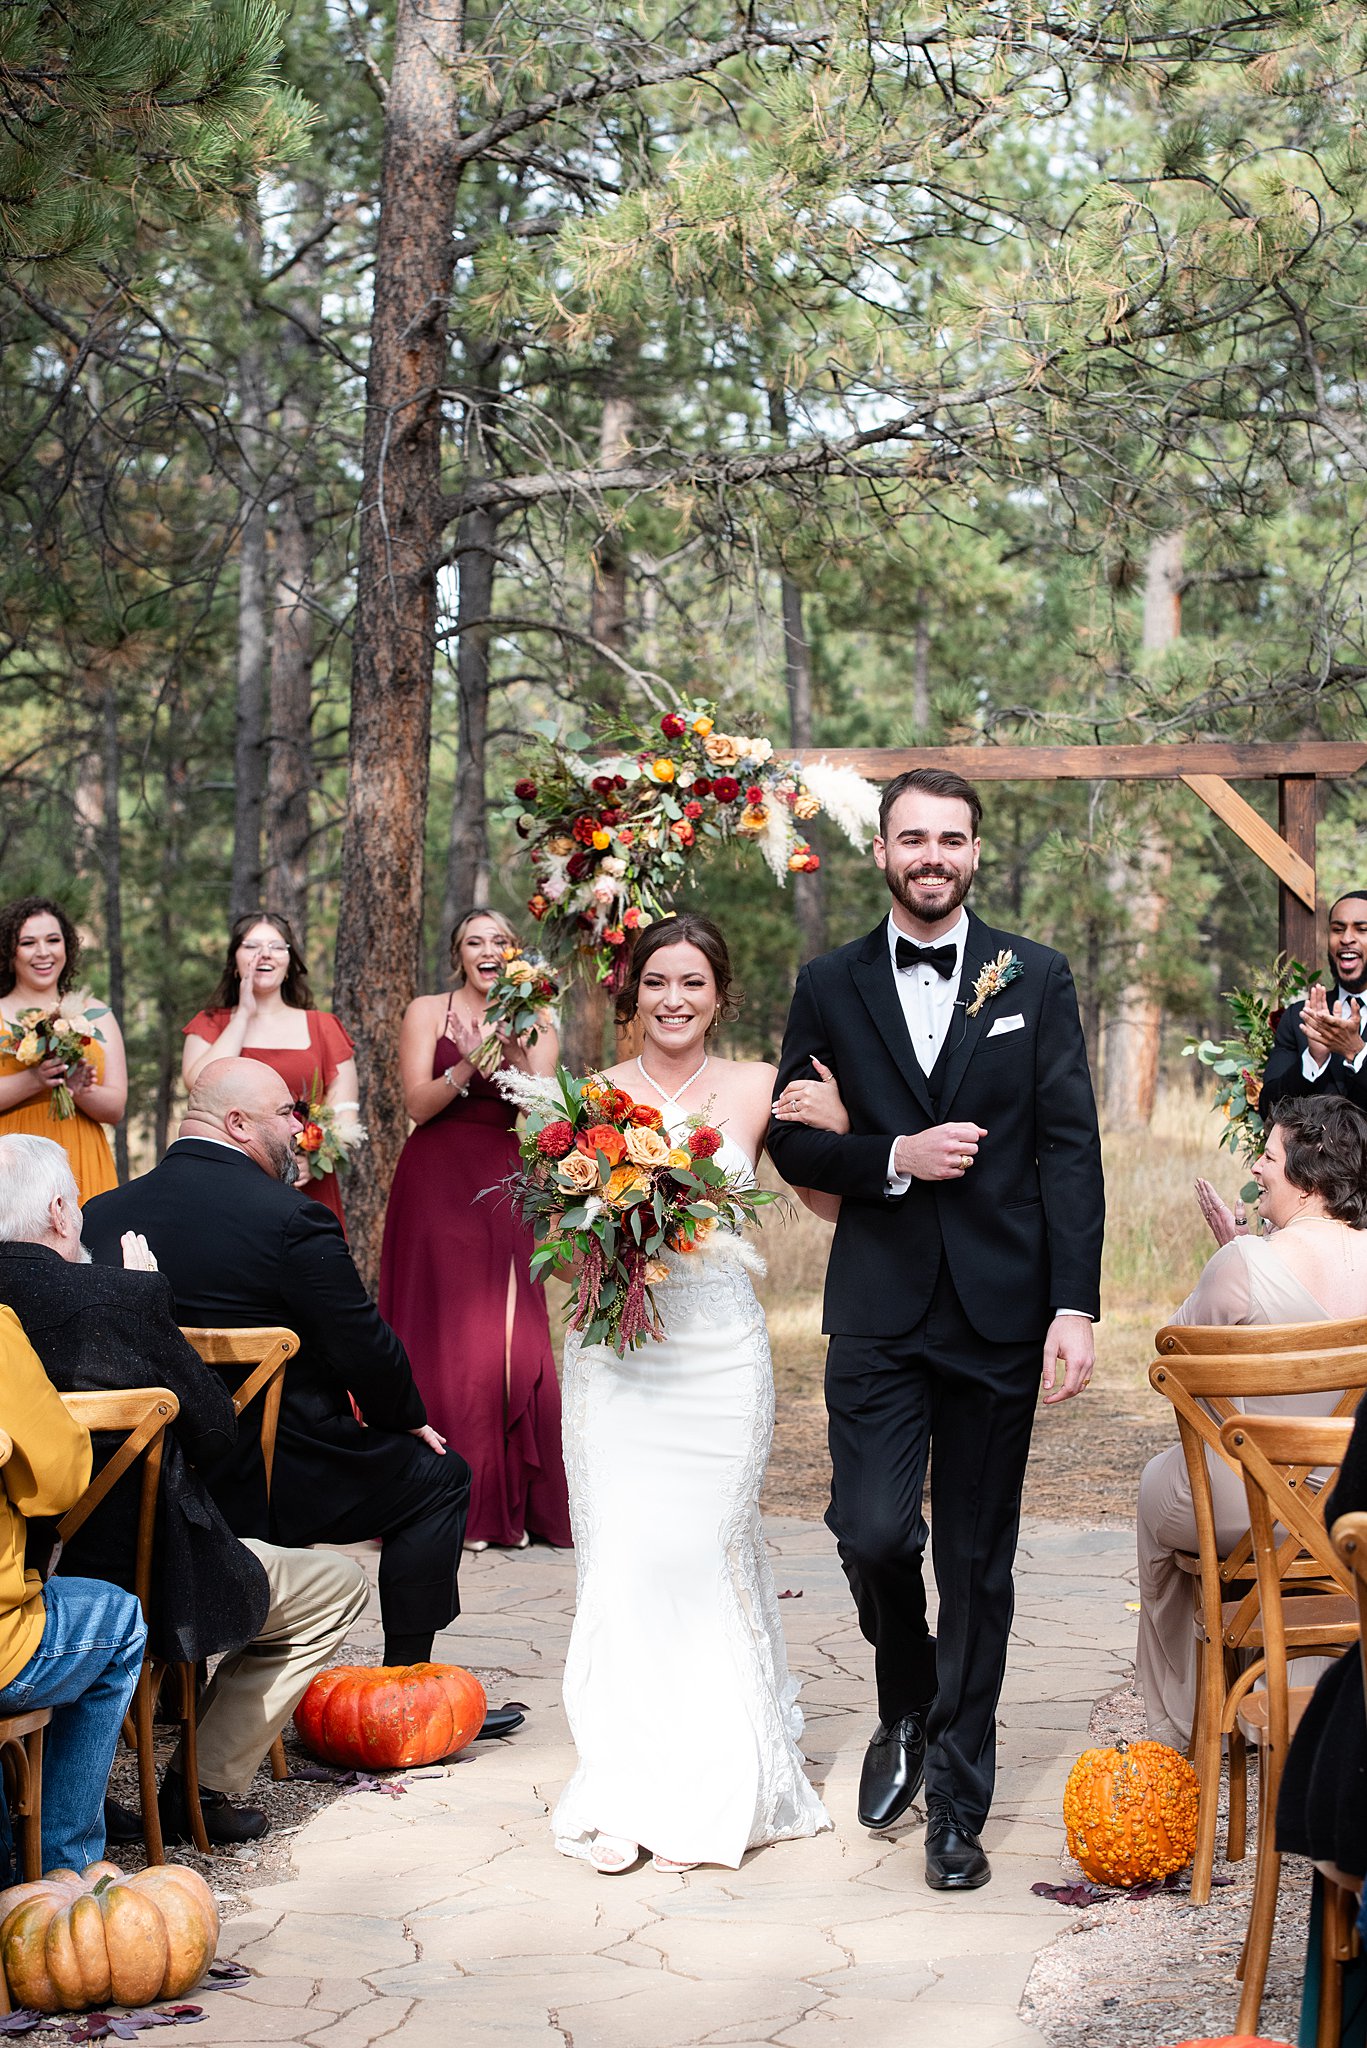 Newlyweds walk down the aisle at their reception in one of the small wedding venues in colorado springs